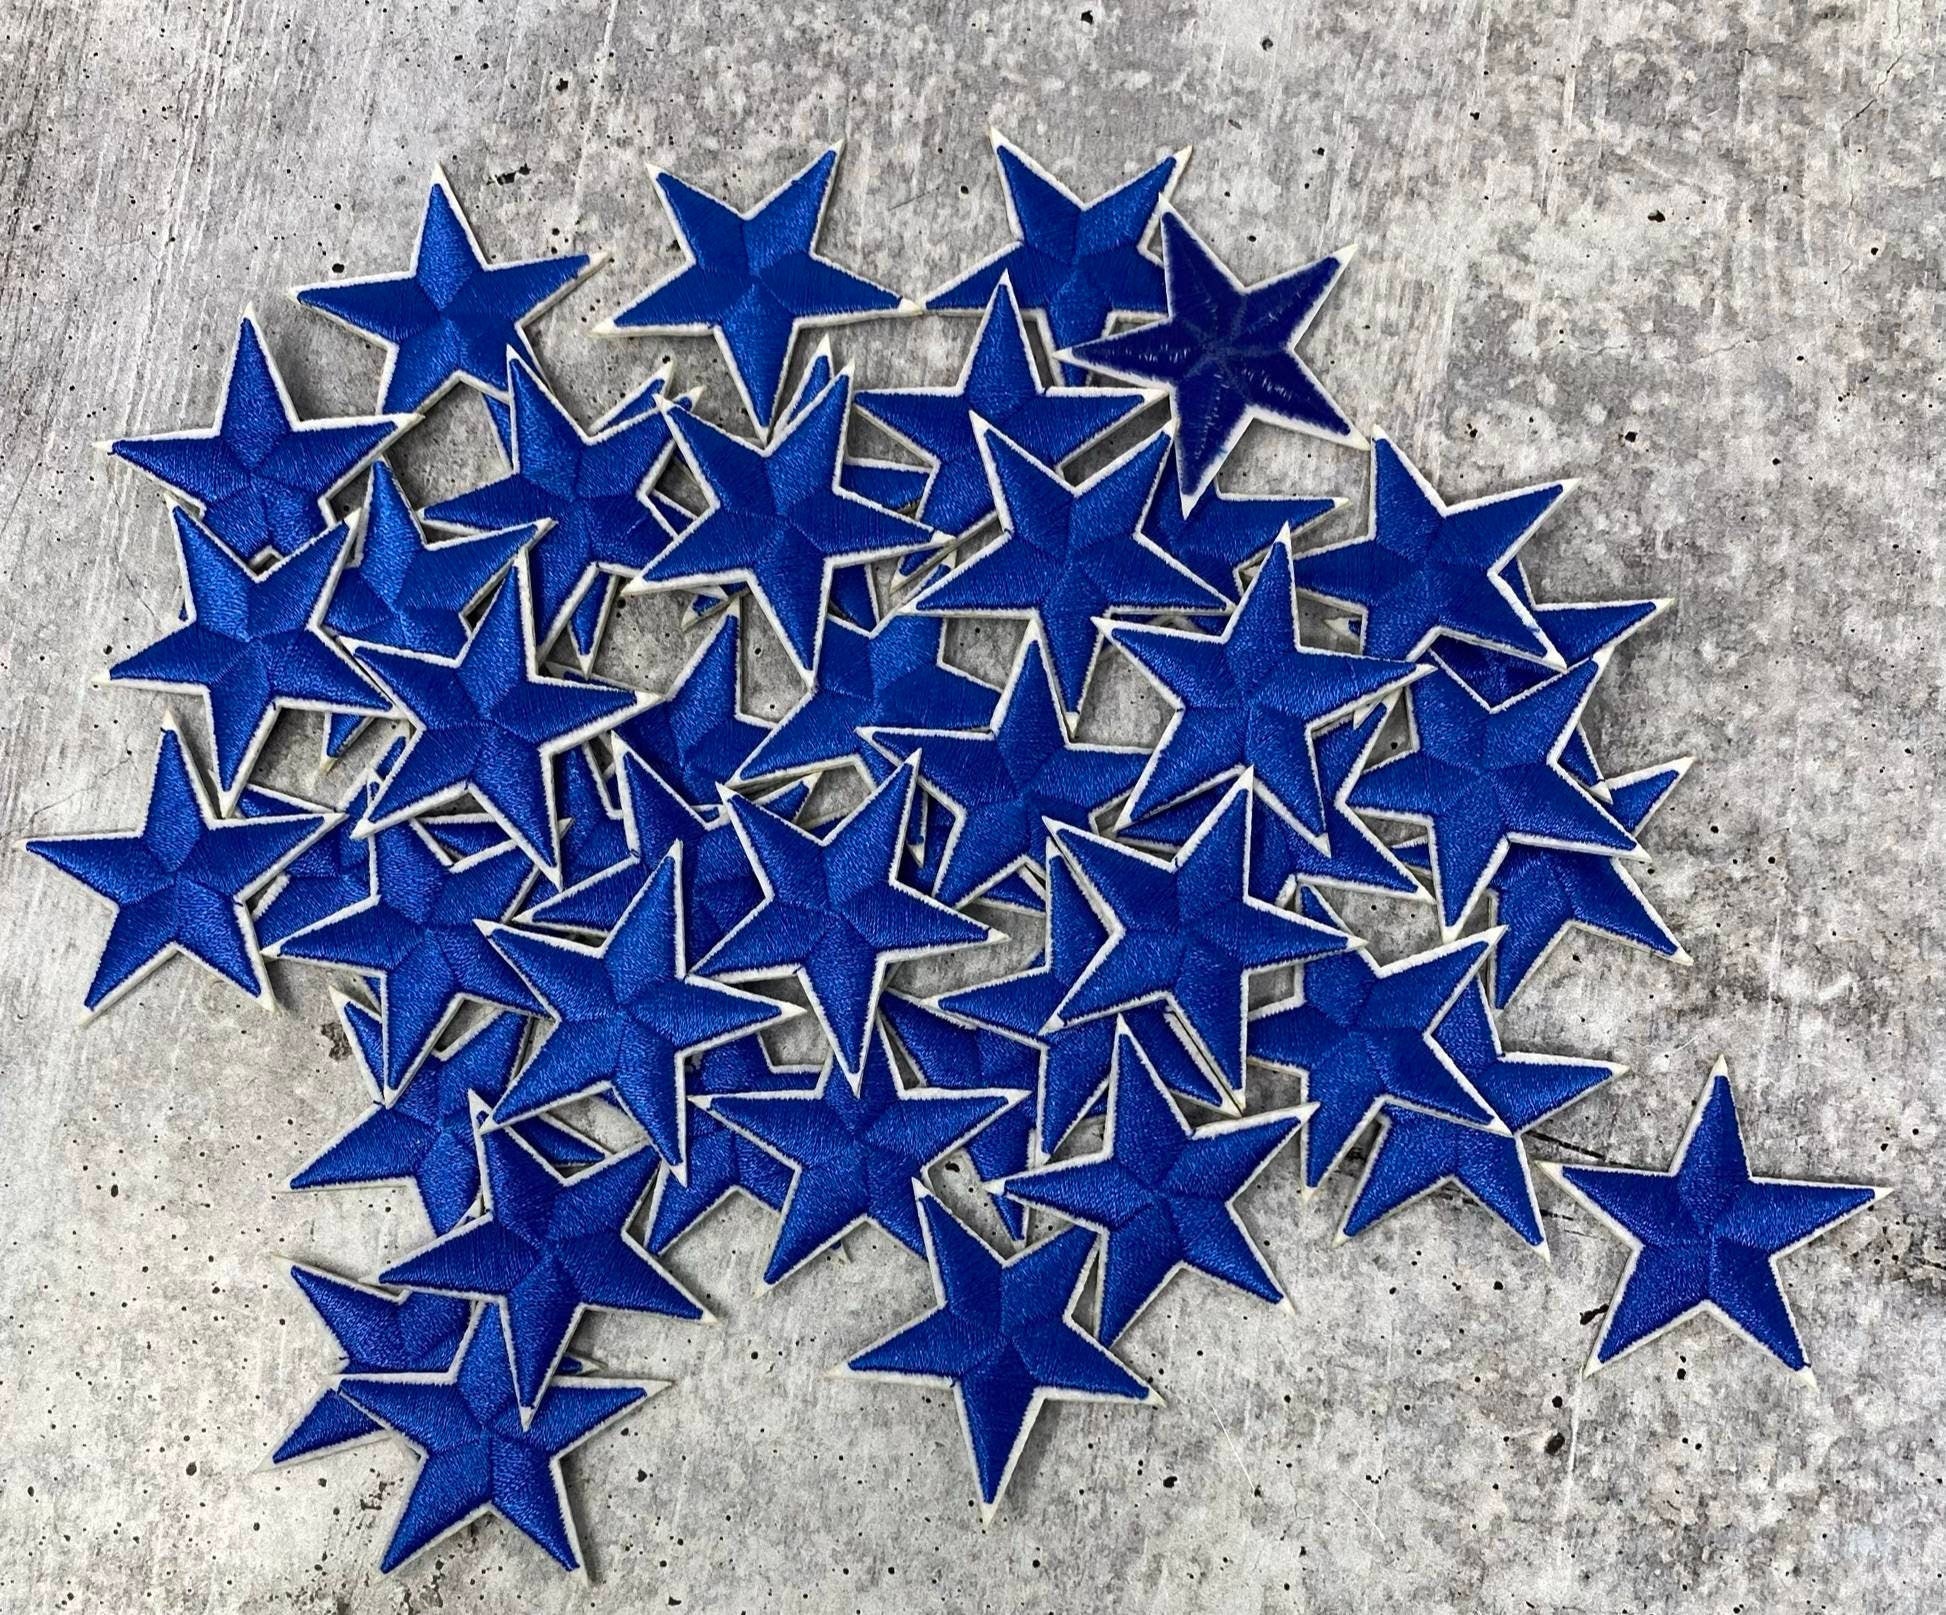 Iron on Patches - Blue Star Patch Iron on Patch Embroidered Applique Star S-50